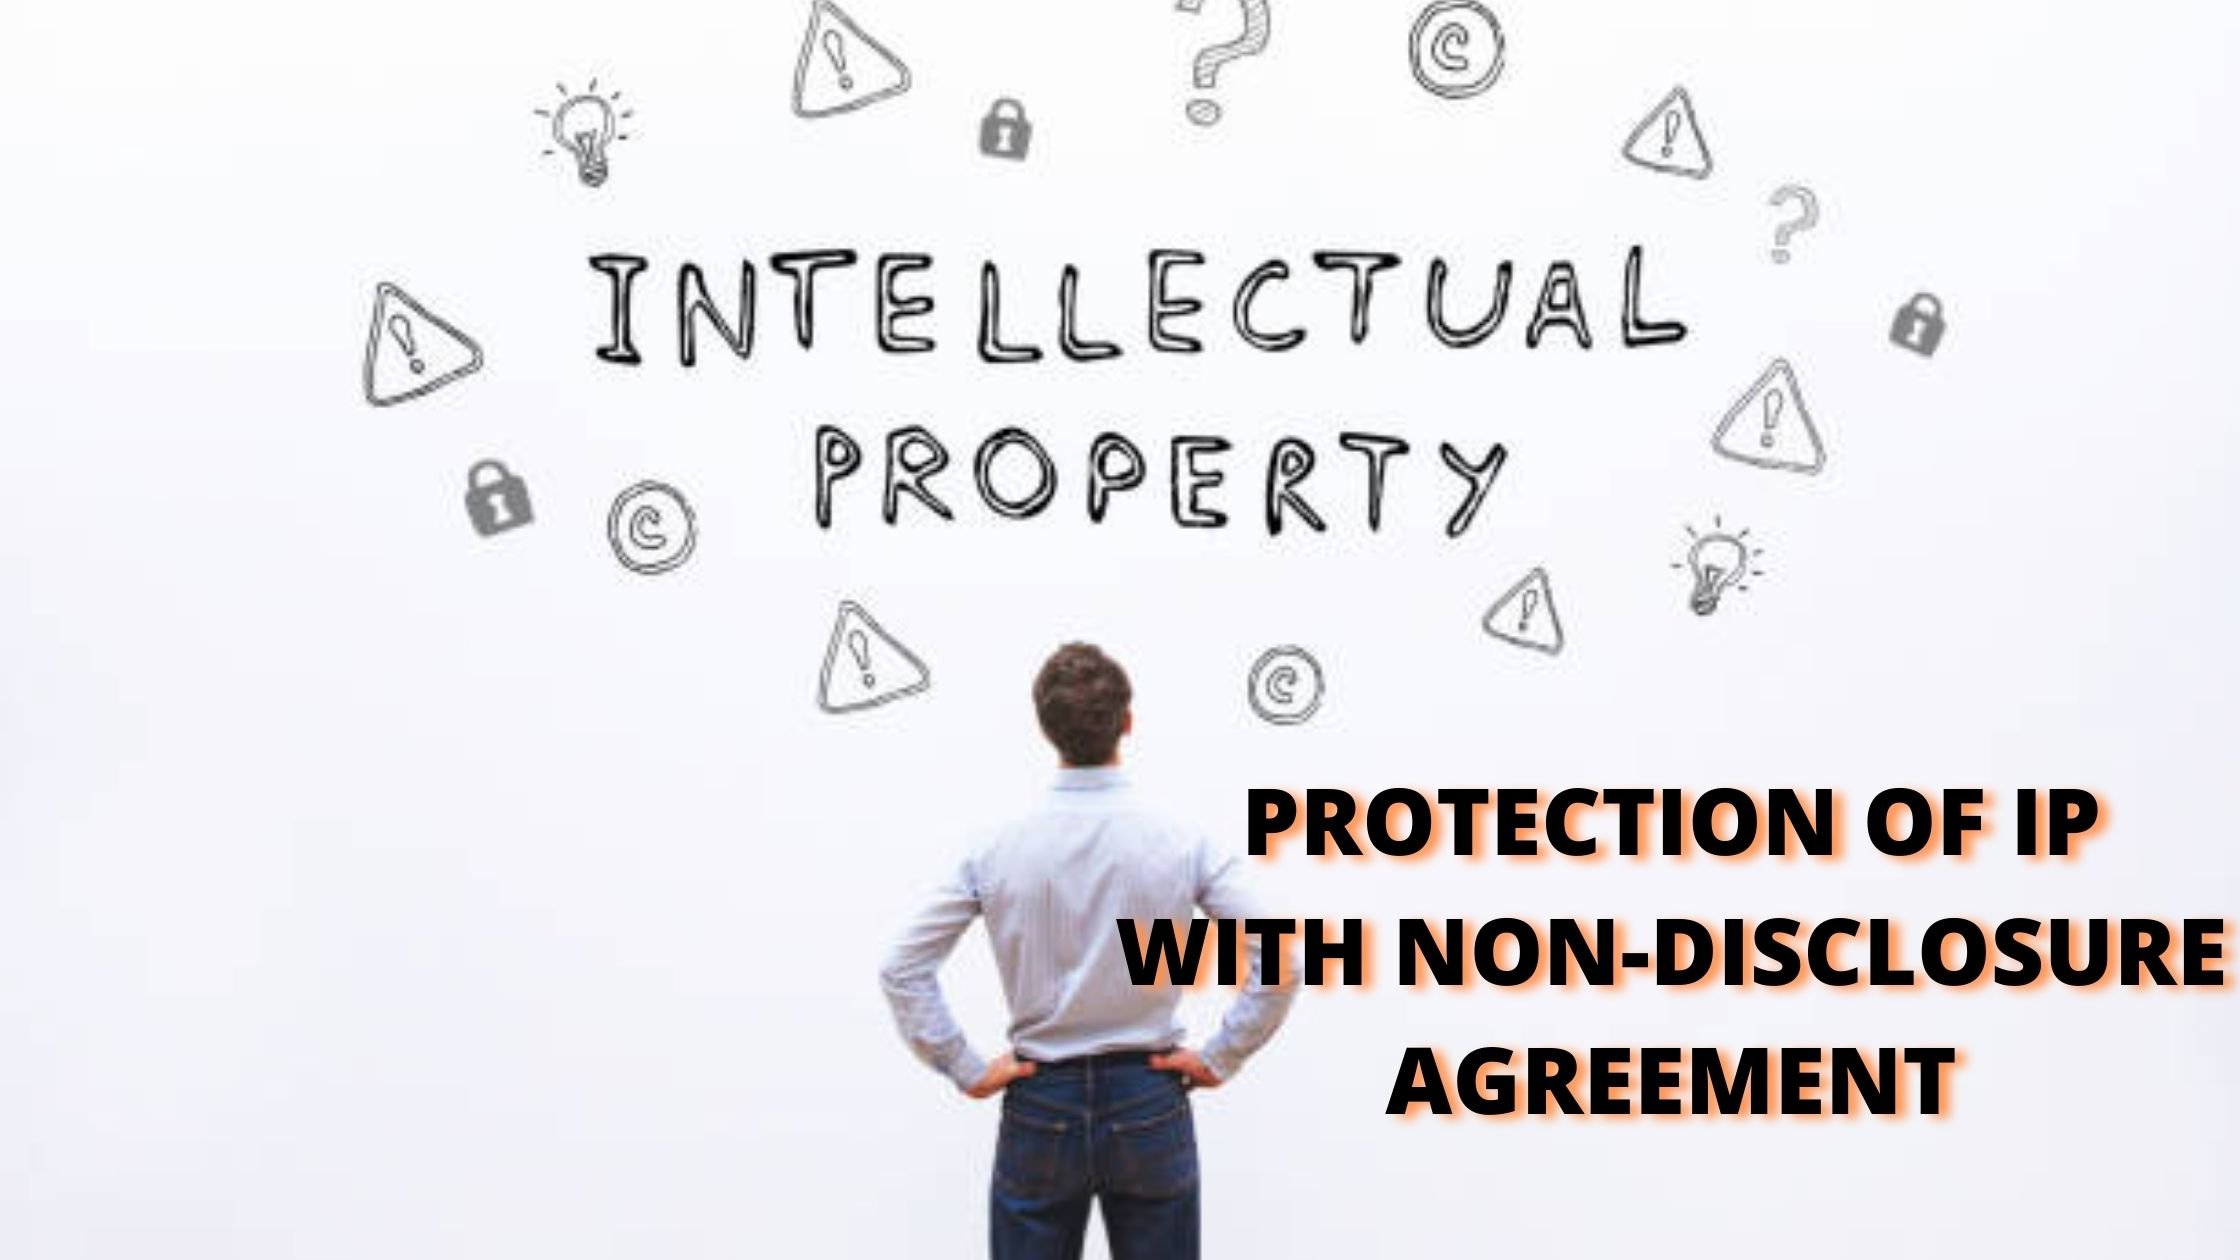 PROTECTION OF INTELLECTUAL PROPERTY WITH NON-DISCLOSURE AGREEMENT